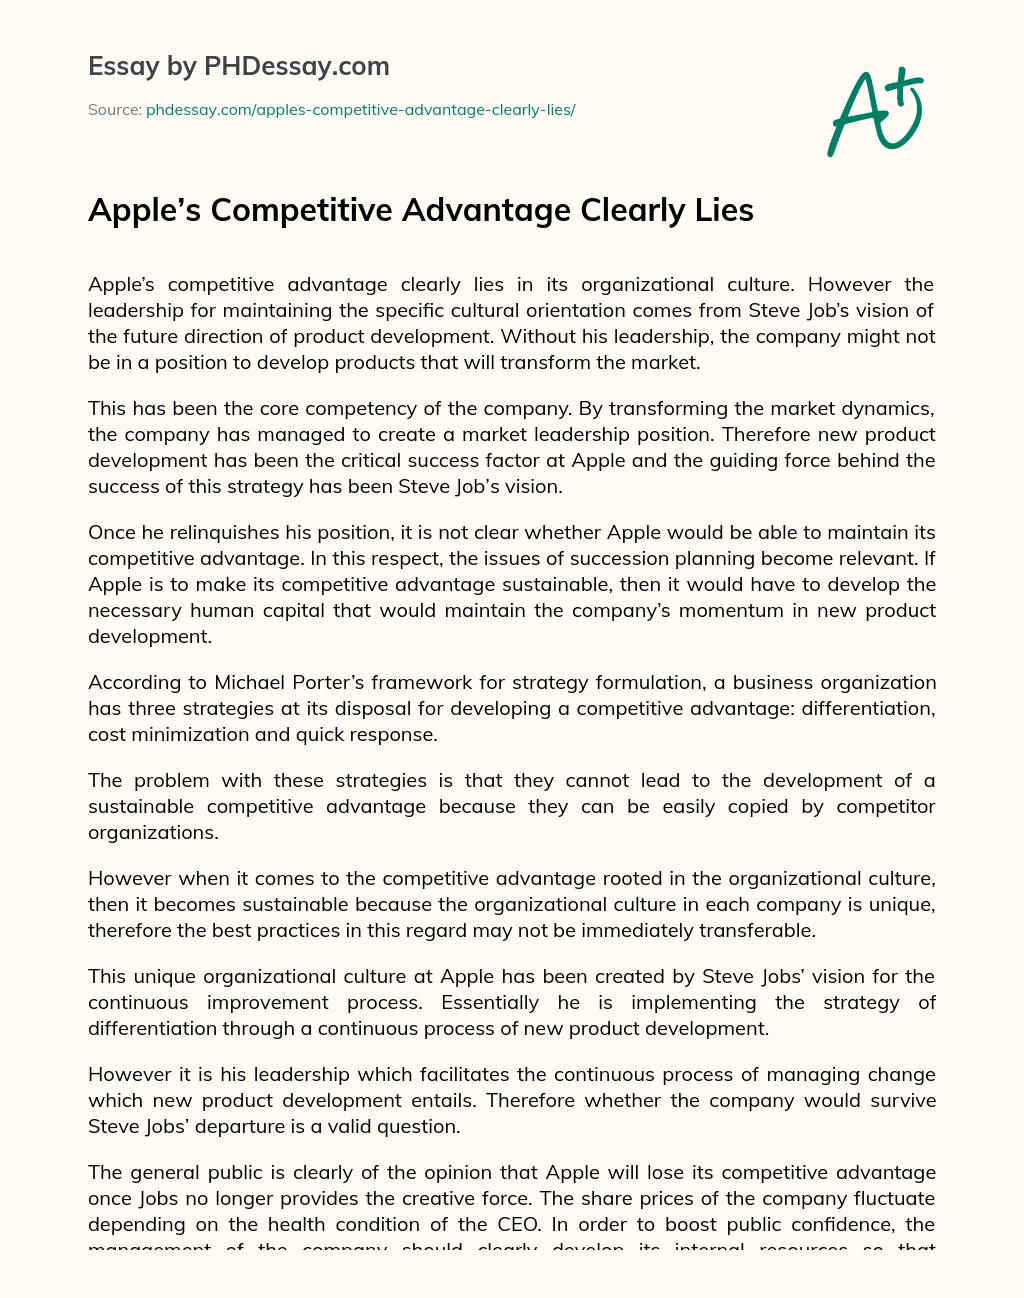 Apple’s Competitive Advantage Clearly Lies essay